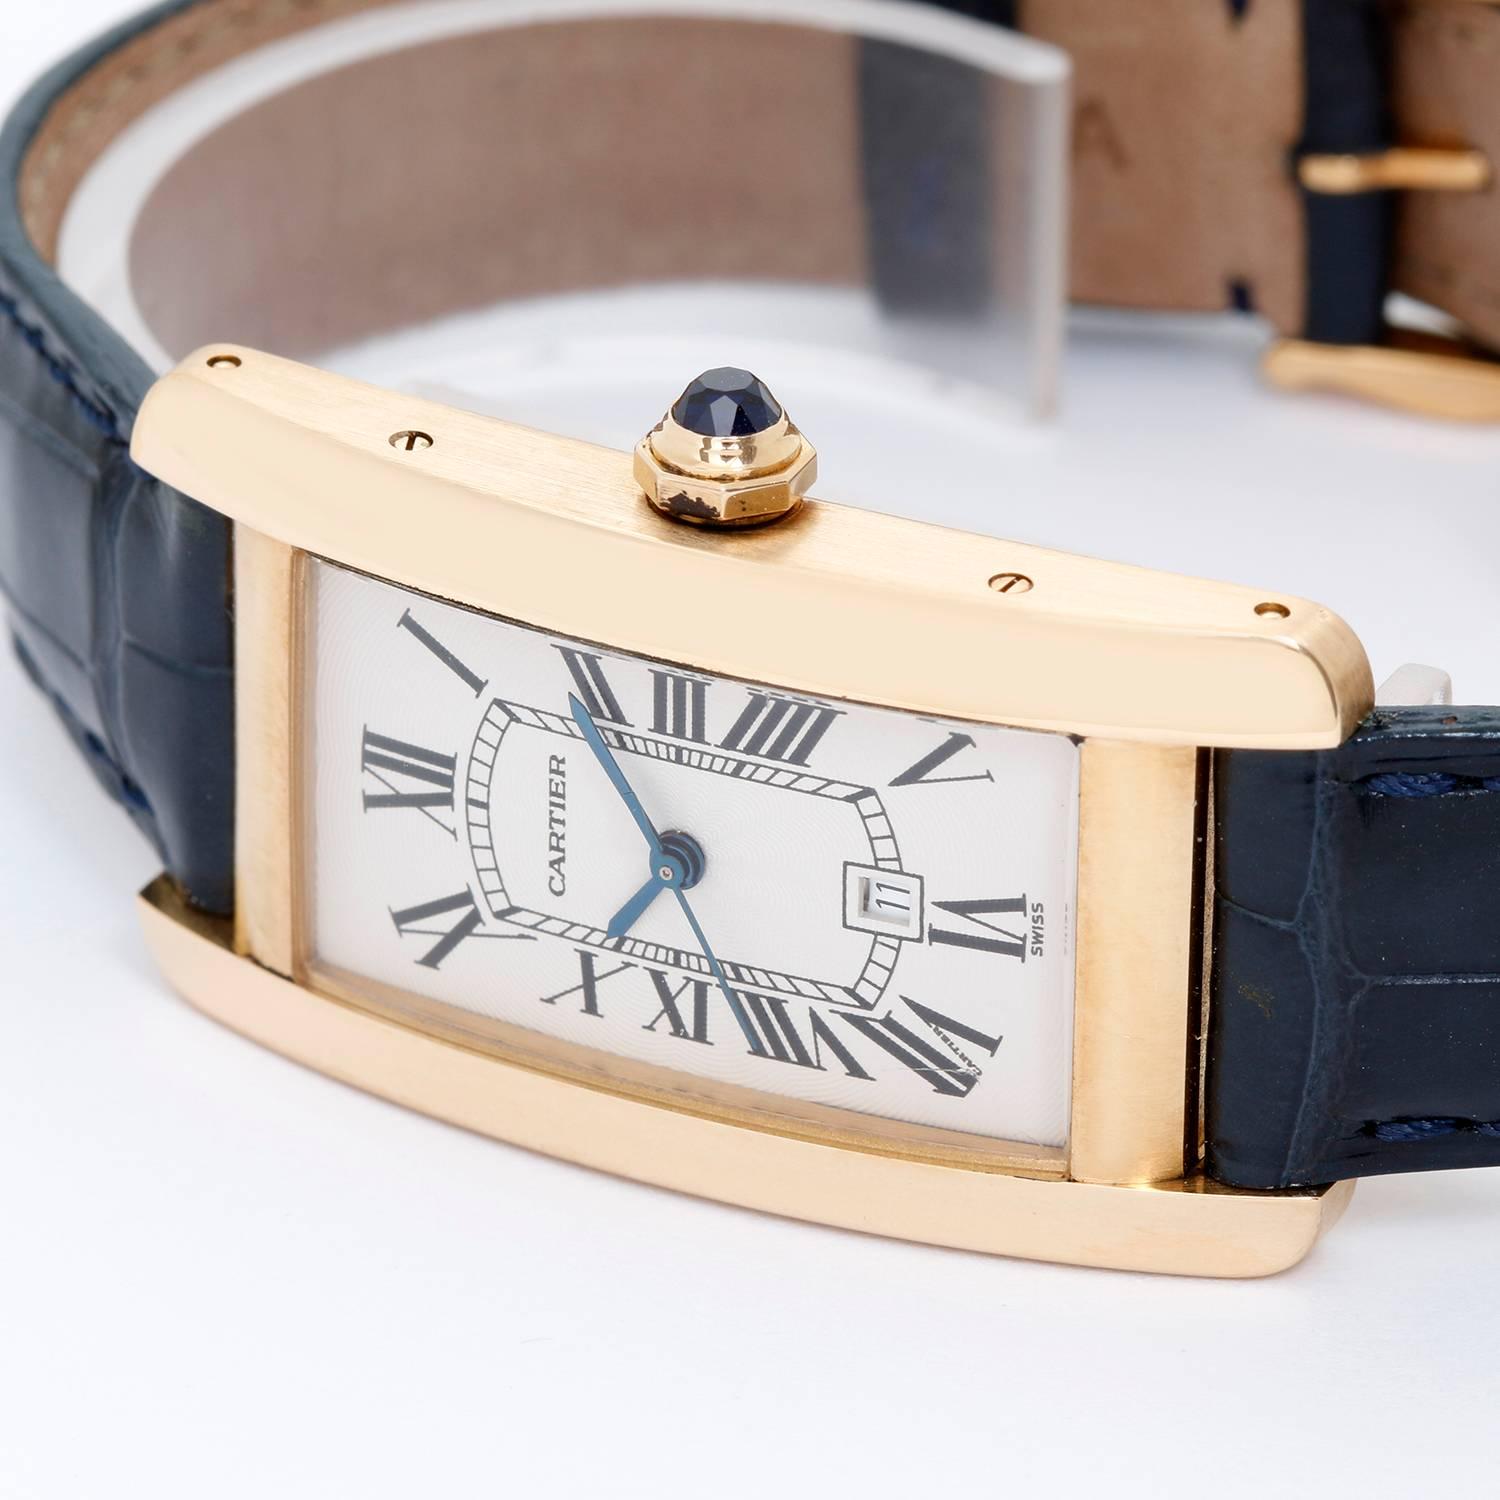 Cartier Tank Americaine (or American) Men's Gold Watch W2603156 -  Automatic winding with date. 18k yellow gold rectangular style case (28mm x 45mm). Silvered dial with black Roman numerals. Strap band with 18k yellow gold Cartier buckle. Pre-owned